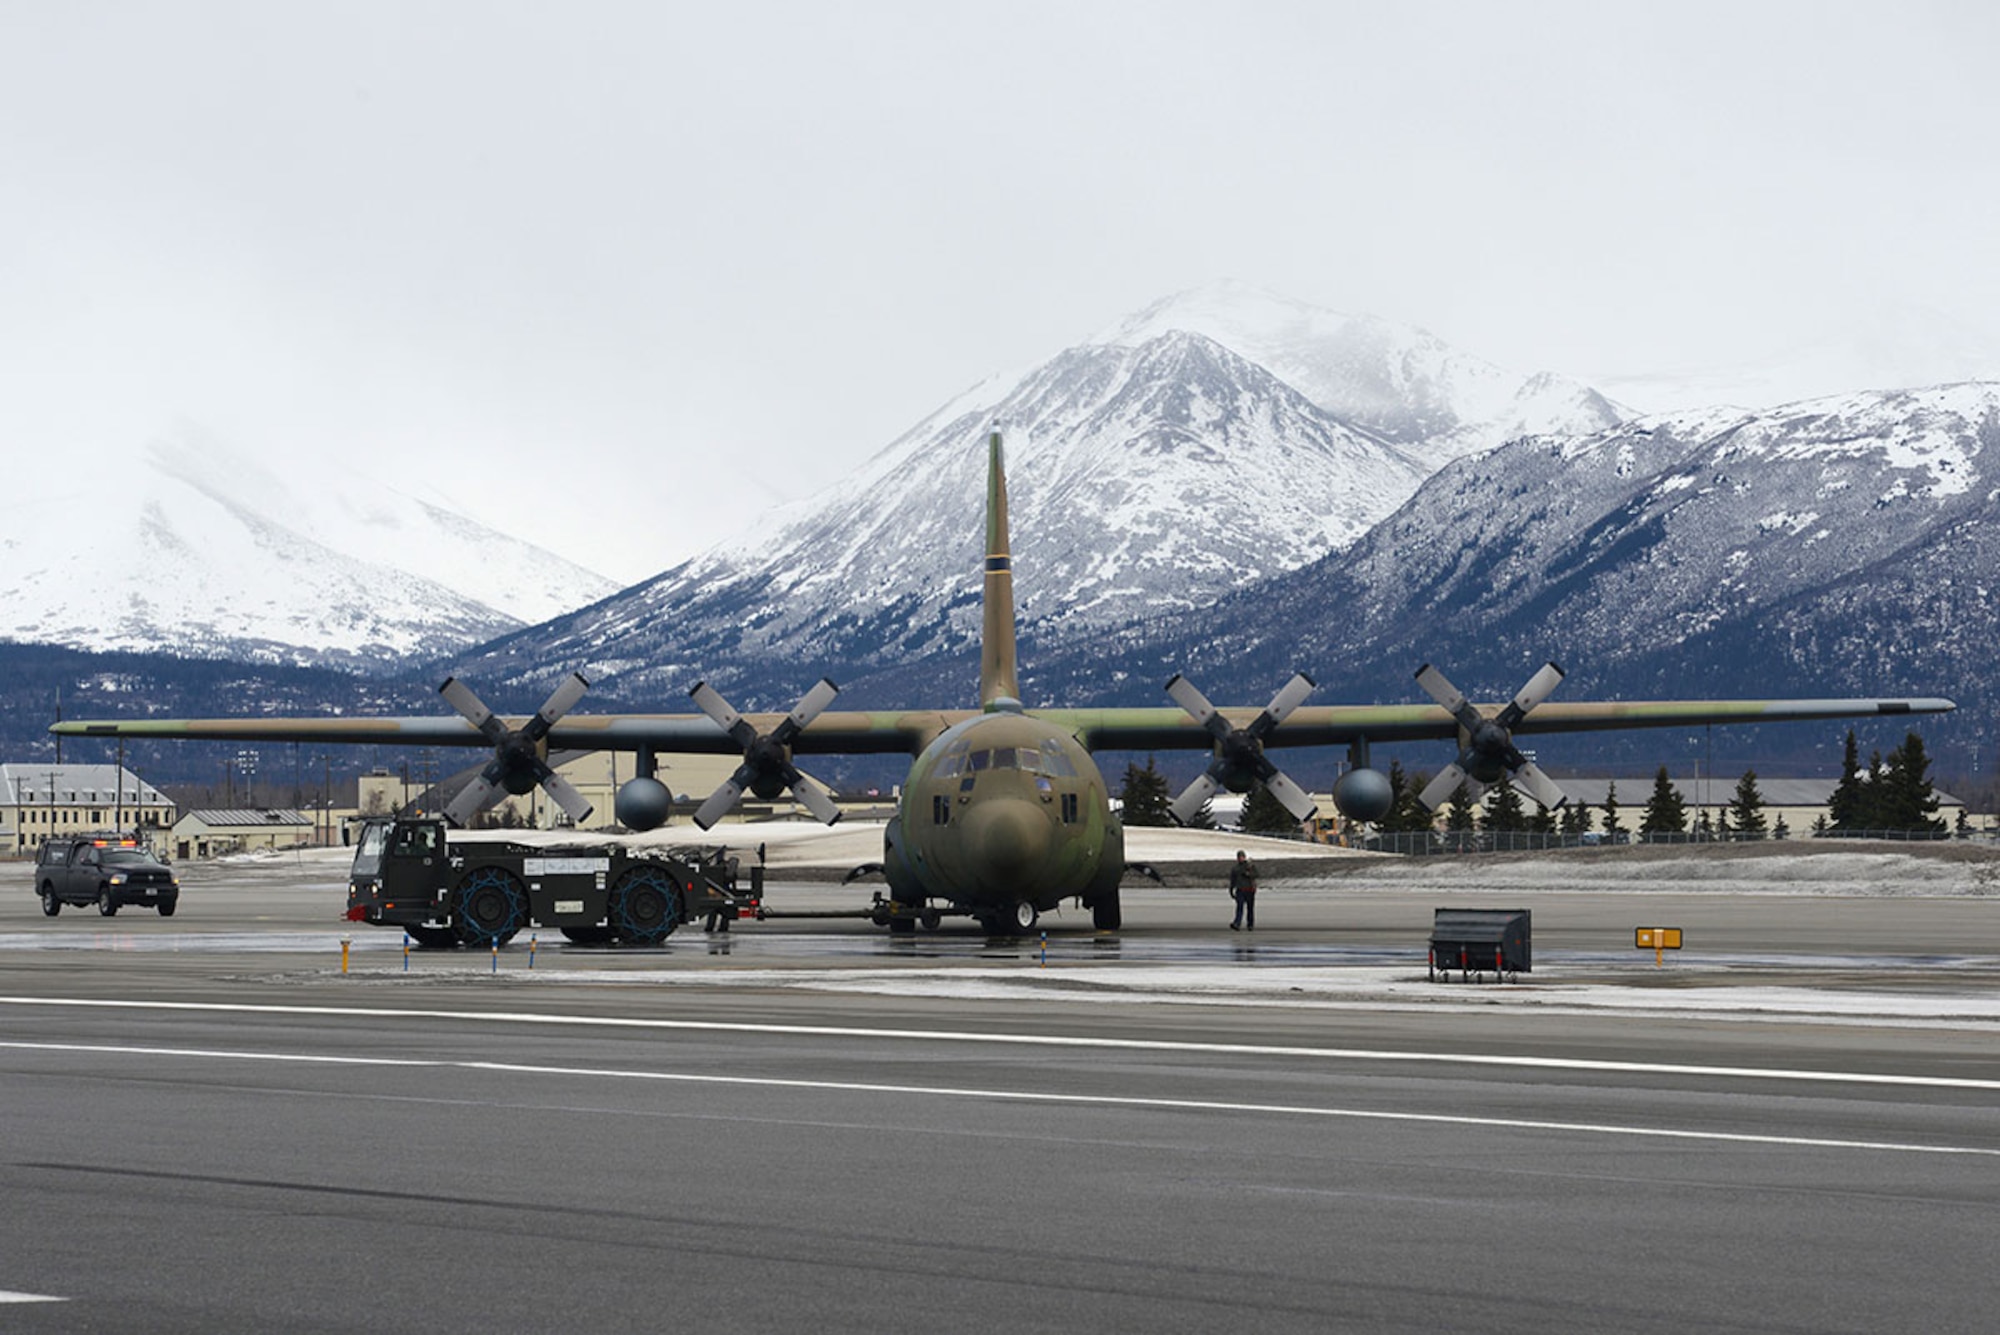 Airmen and contracted personnel work together to tow the static C-130 Hercules across the flight line at Joint Base Elmendorf-Richardson Feb. 27, 2016. The aircraft has been towed to Hangar 21 for refurbishment and is scheduled to return to Heritage Park in April. (U.S. Air Force photo by Airman 1st Class Christopher R. Morales)